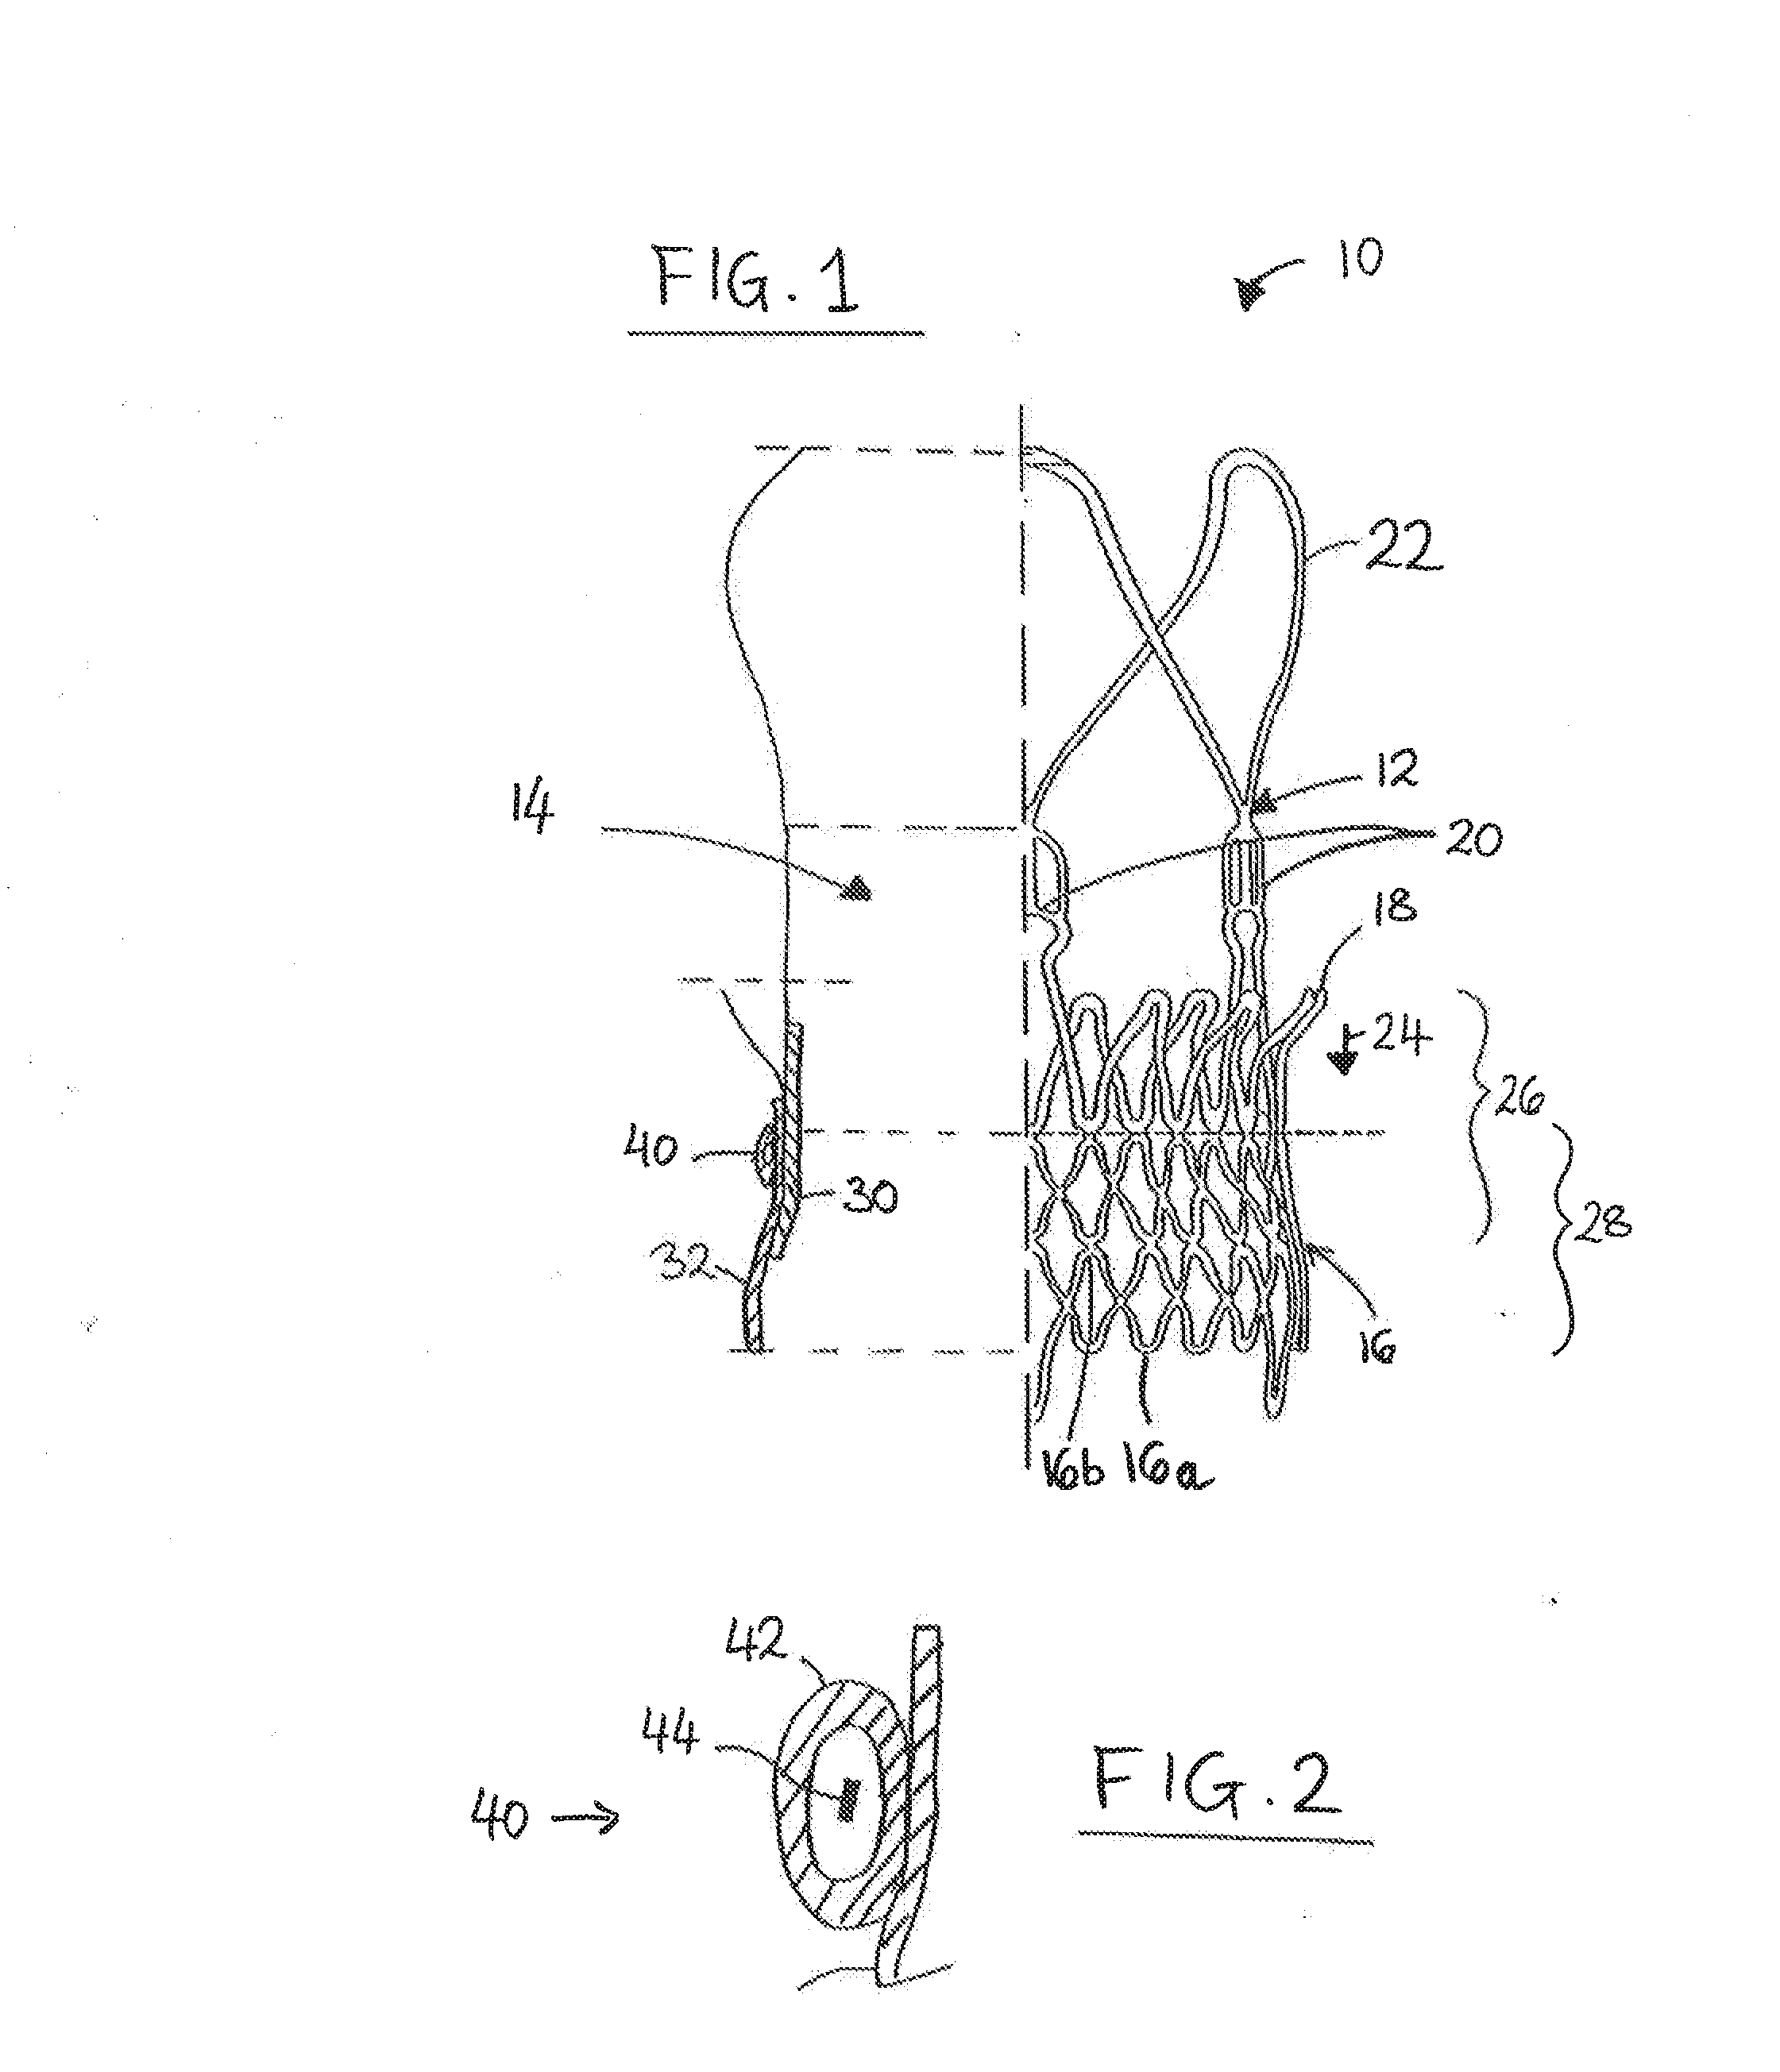 Prosthesis Seals and Methods for Sealing an Expandable Prosthesis